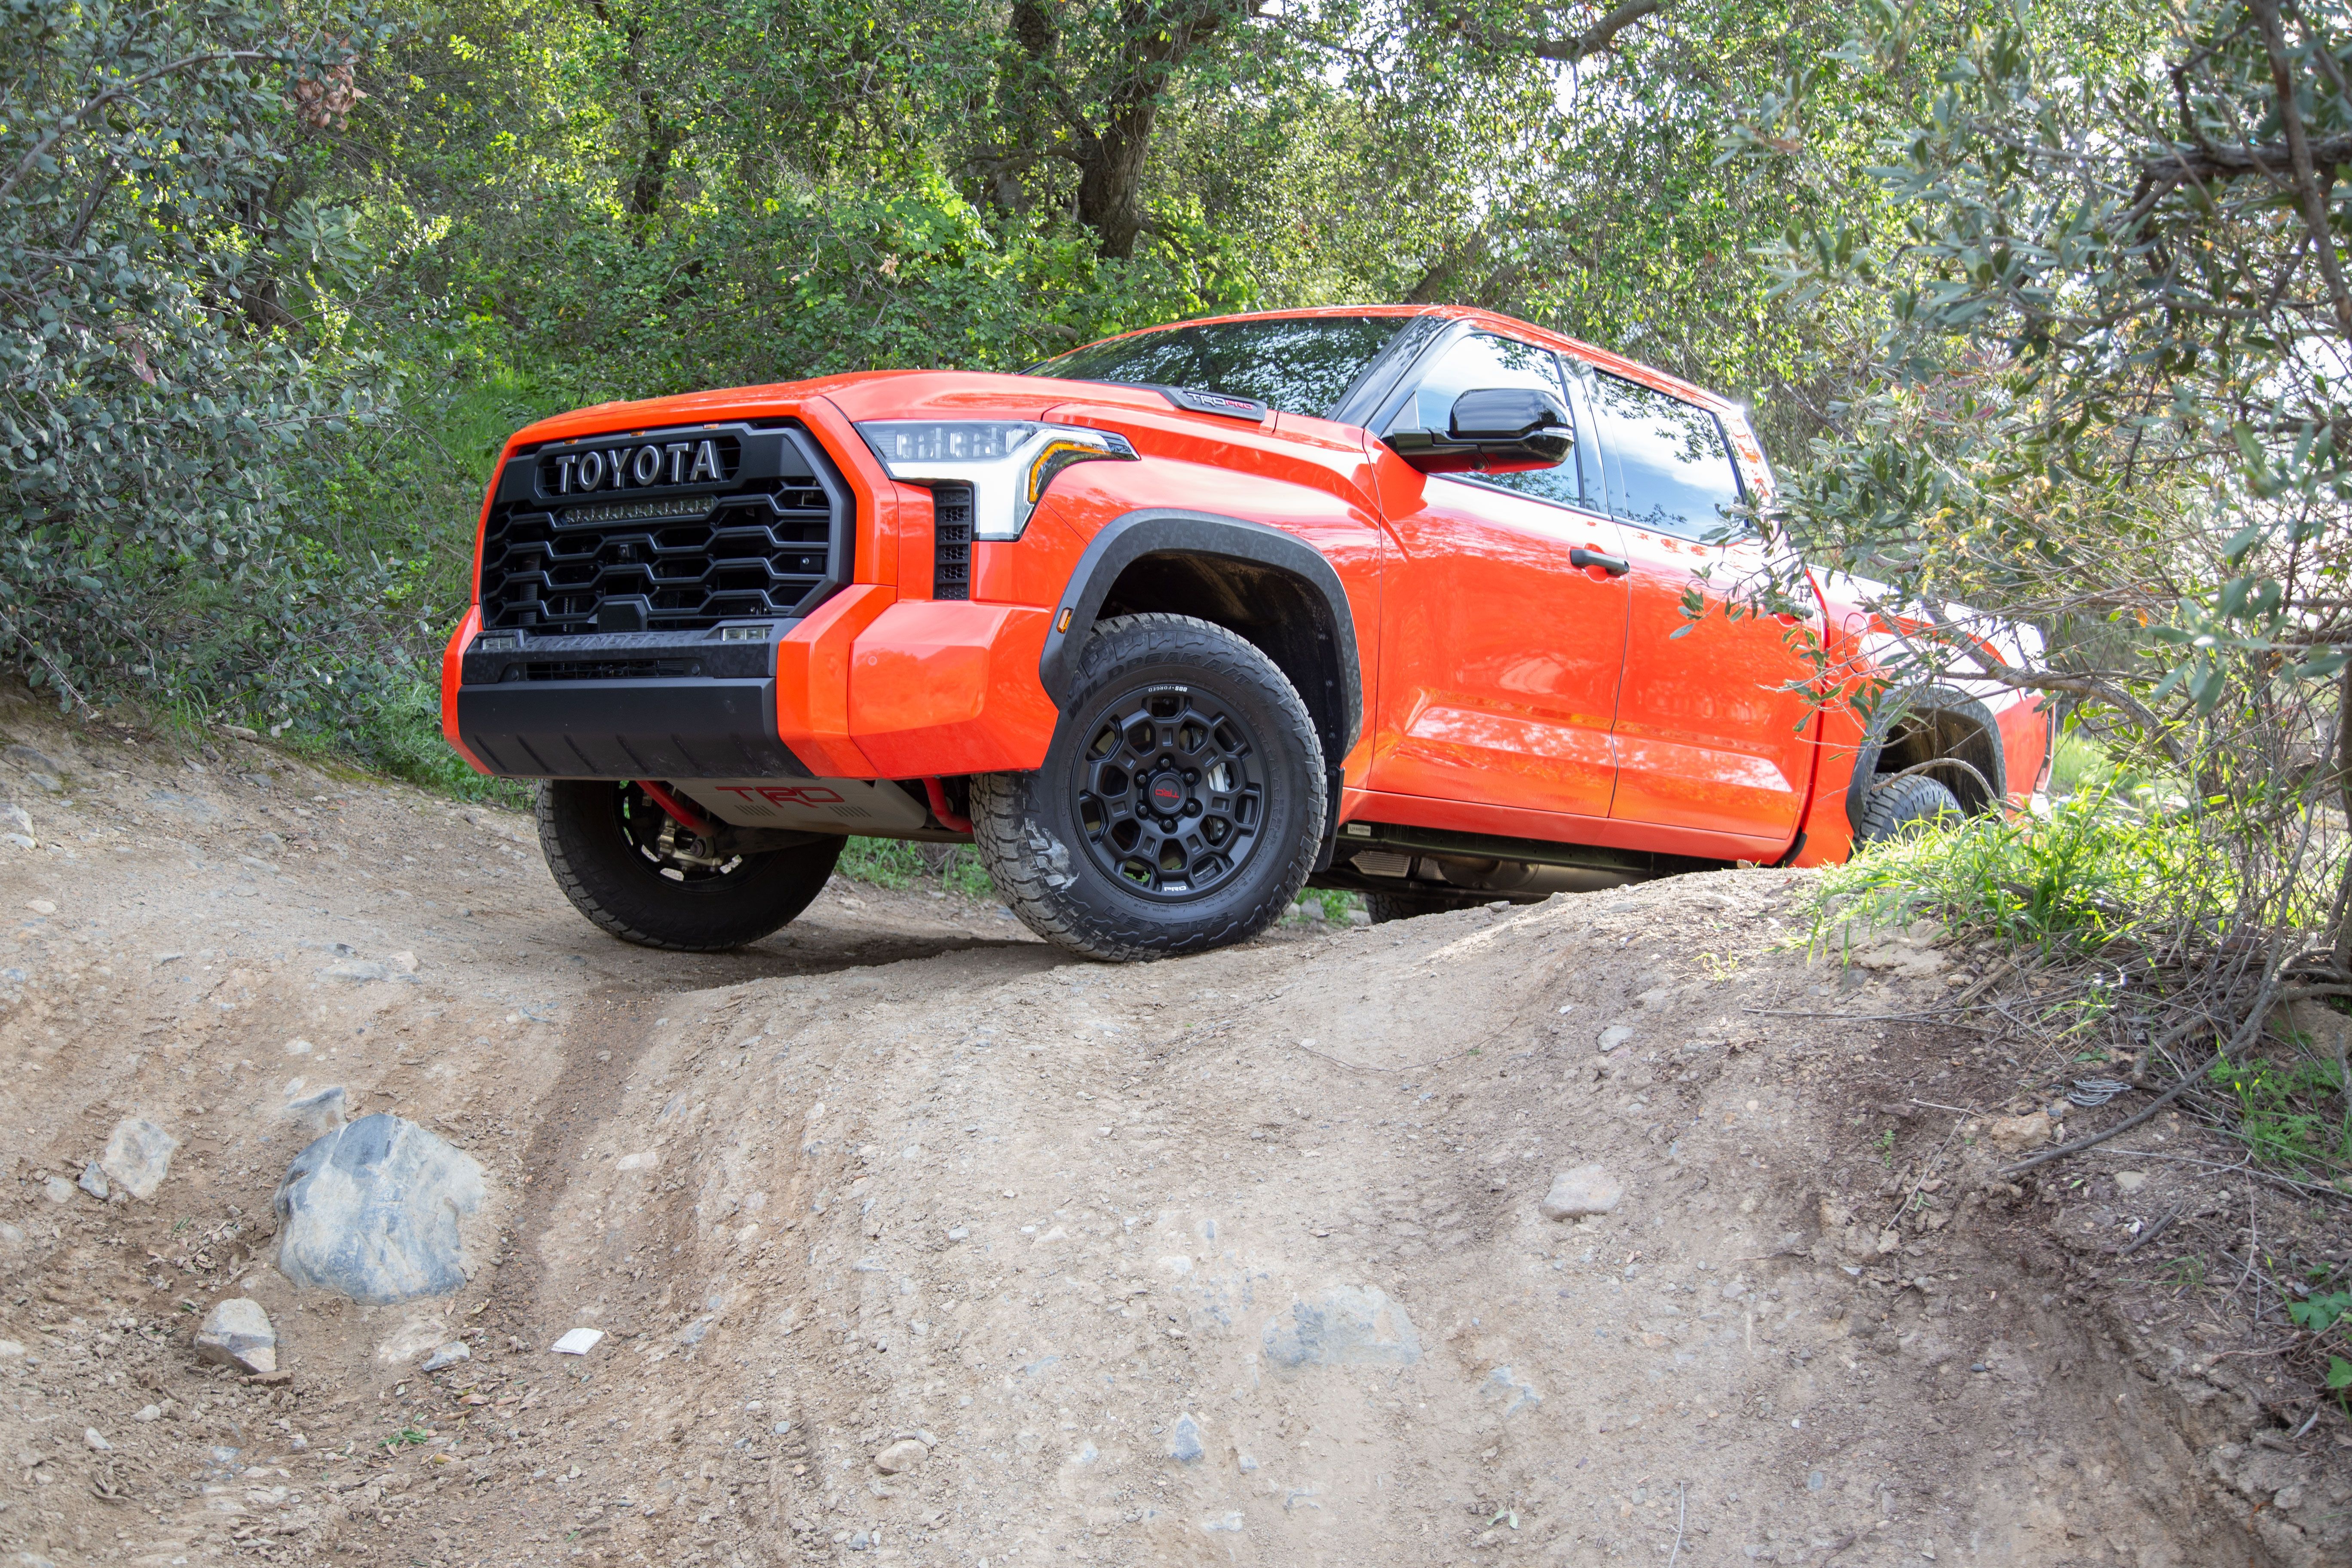 Toyota Tundra TRD Pro truck extreme off roading